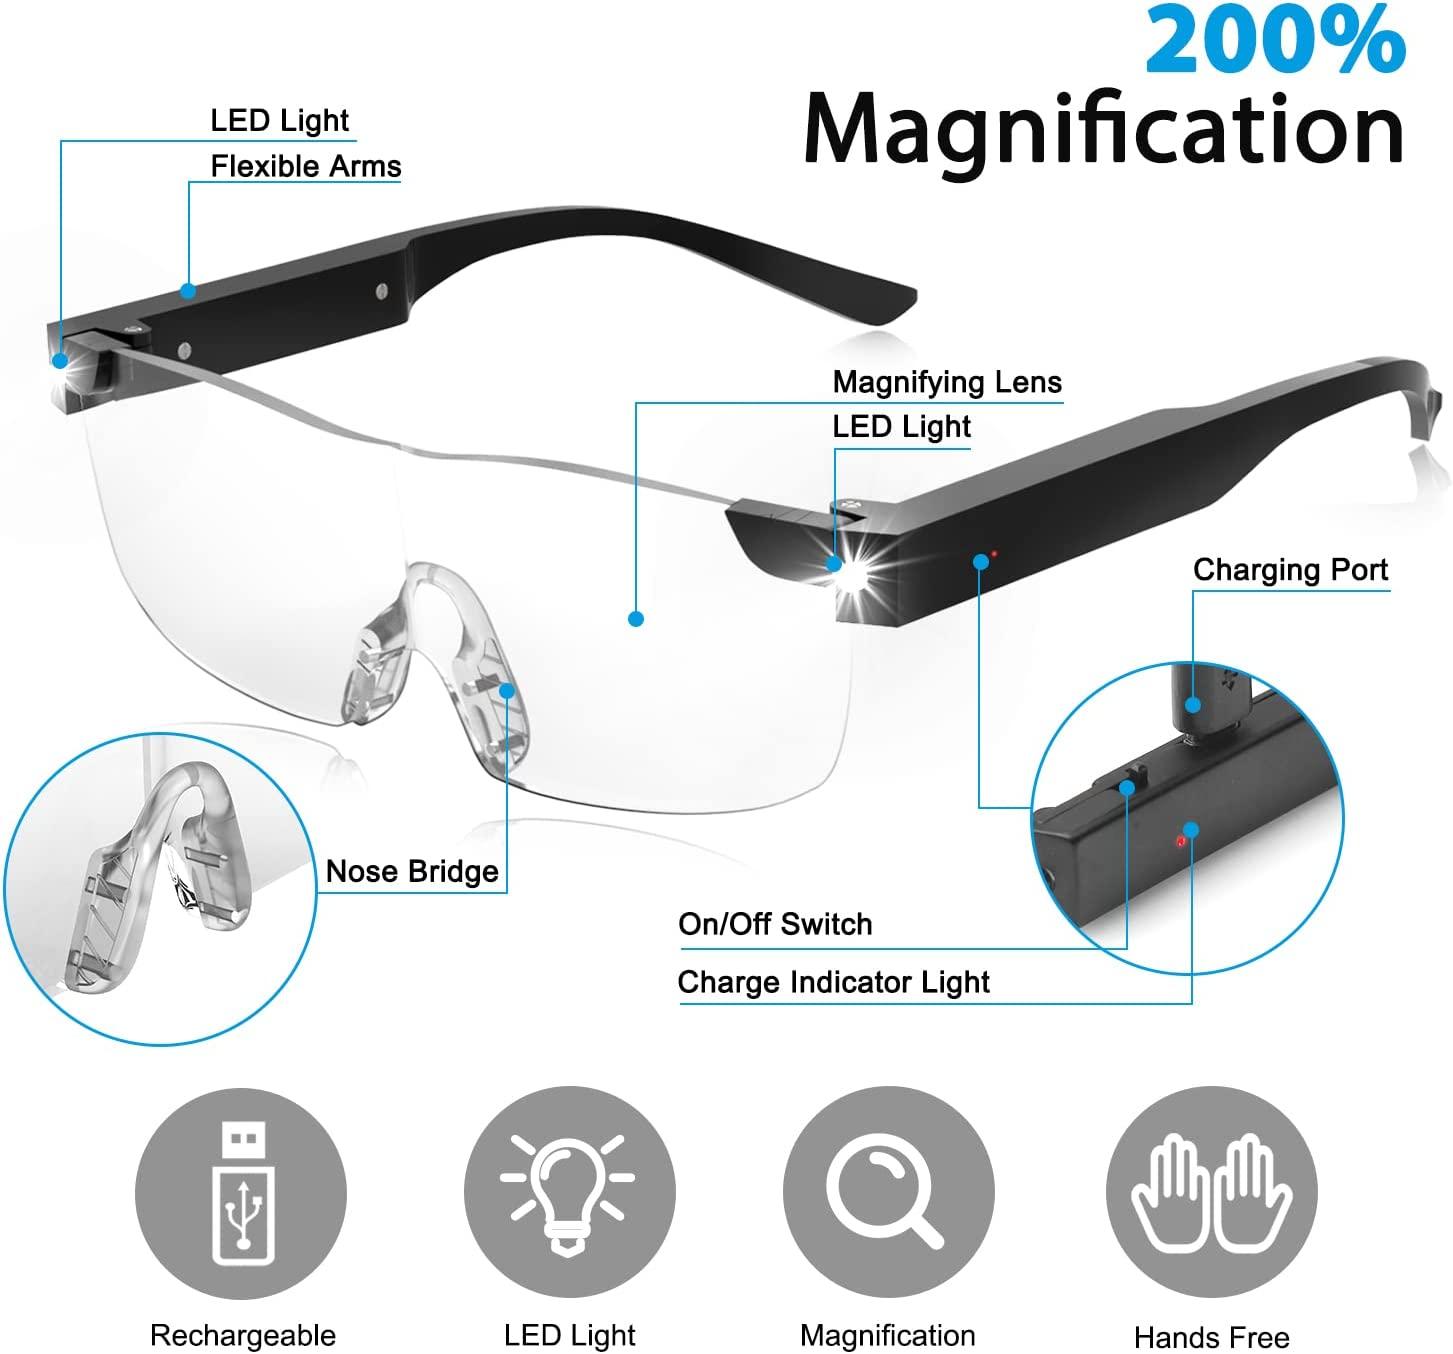 SKYWAY Magnifying Glasses with Light, 200% LED Lighted Rechargeable  Magnifier Eyeglasses for Reading Hobbies and Close Work Hands Free Black200